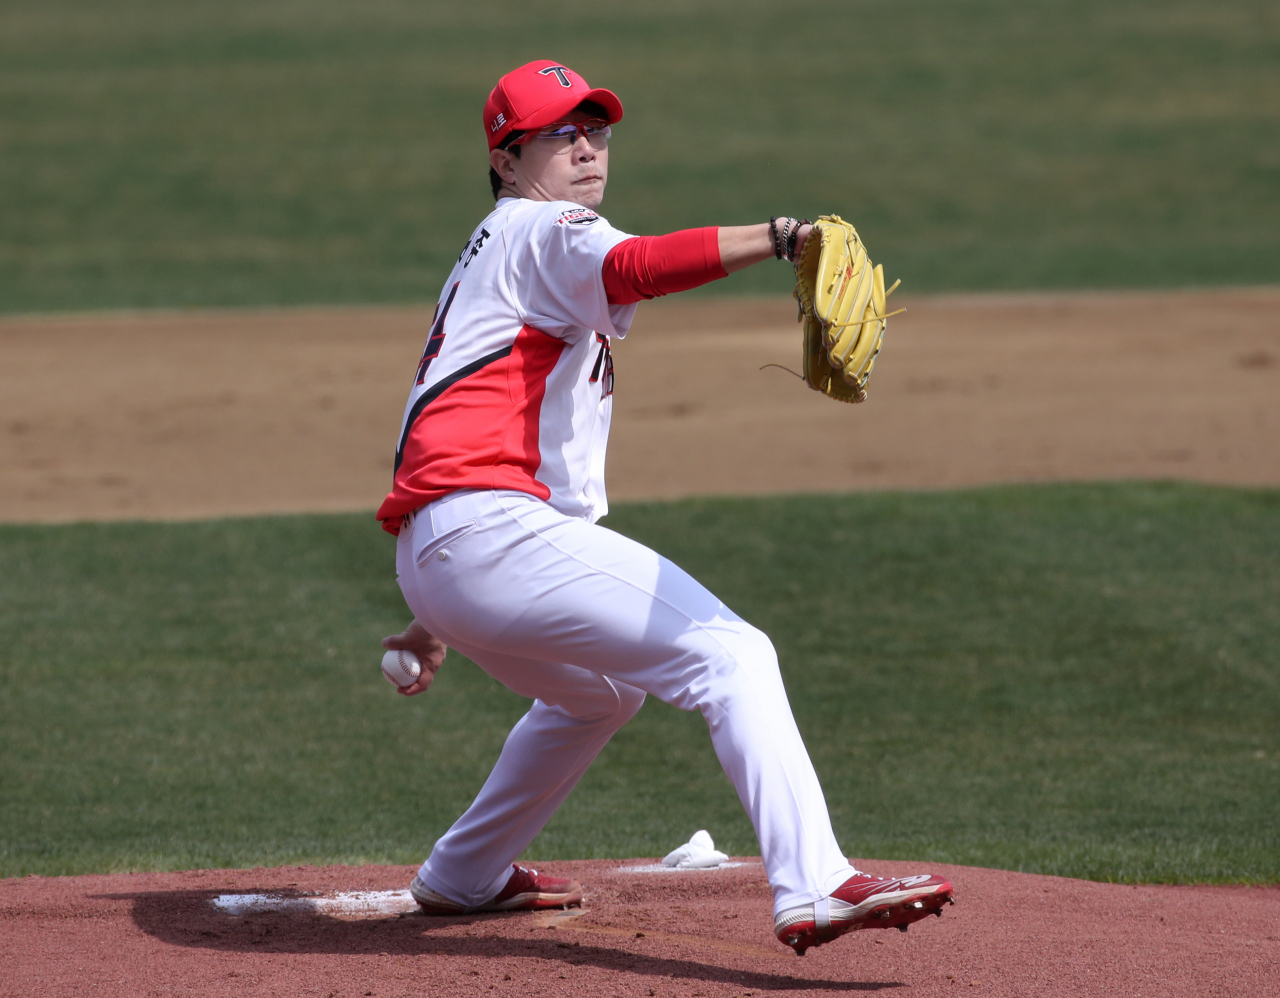 In this file photo from March 22, 2022, Yang Hyeon-jong of the Kia Tigers pitches against the Doosan Bears during the top of the first inning of a Korea Baseball Organization preseason game at Gwangju-Kia Champions Field in Gwangju, some 330 kilometers south of Seoul. (Yonhap)